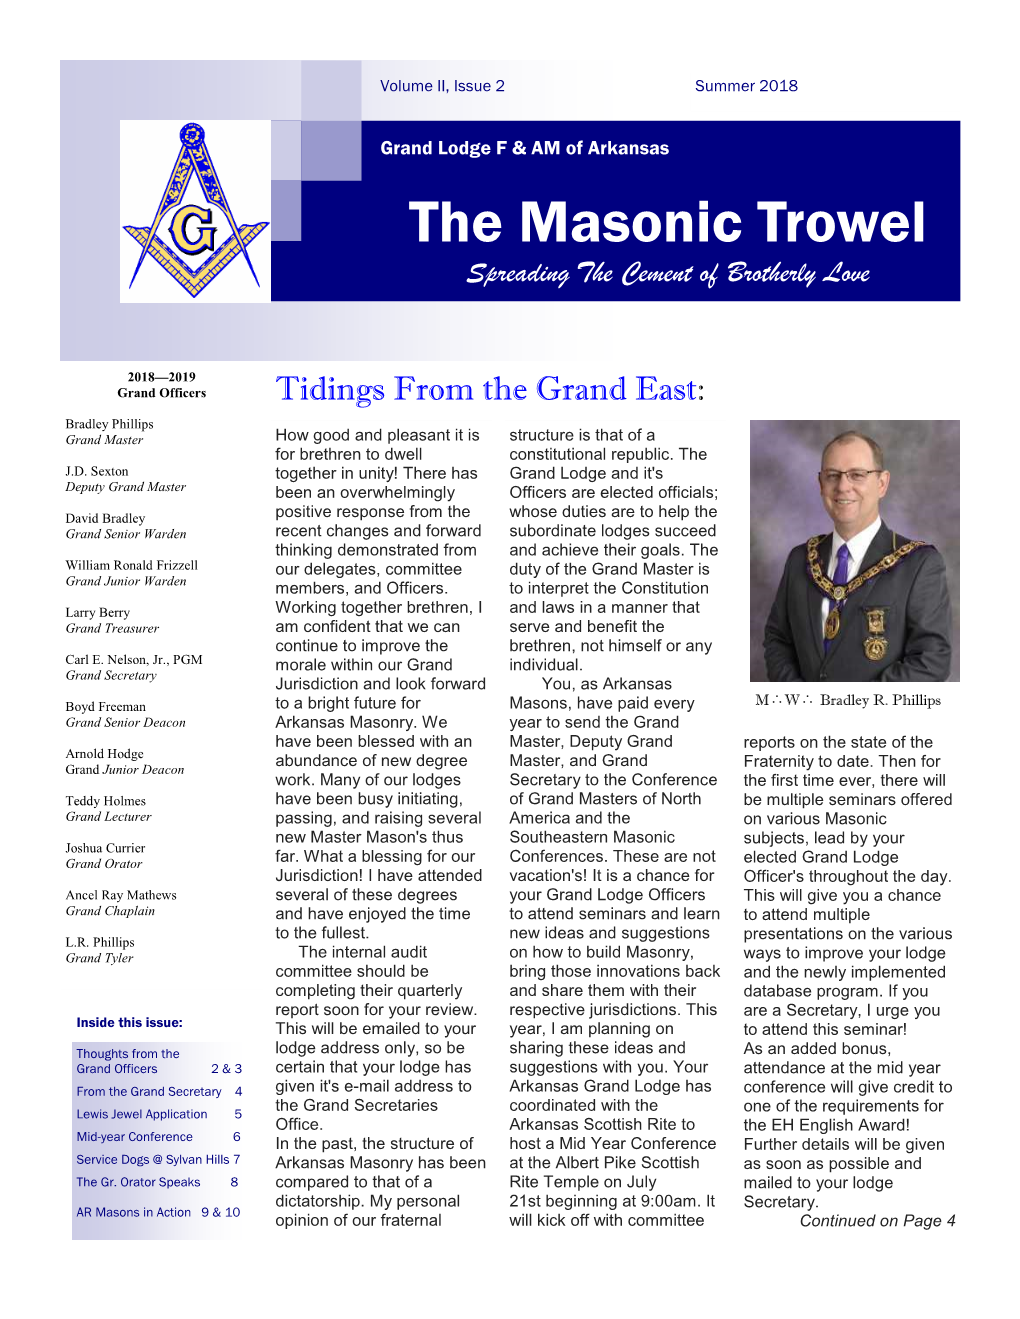 The Masonic Trowel Spreading the Cement of Brotherly Love